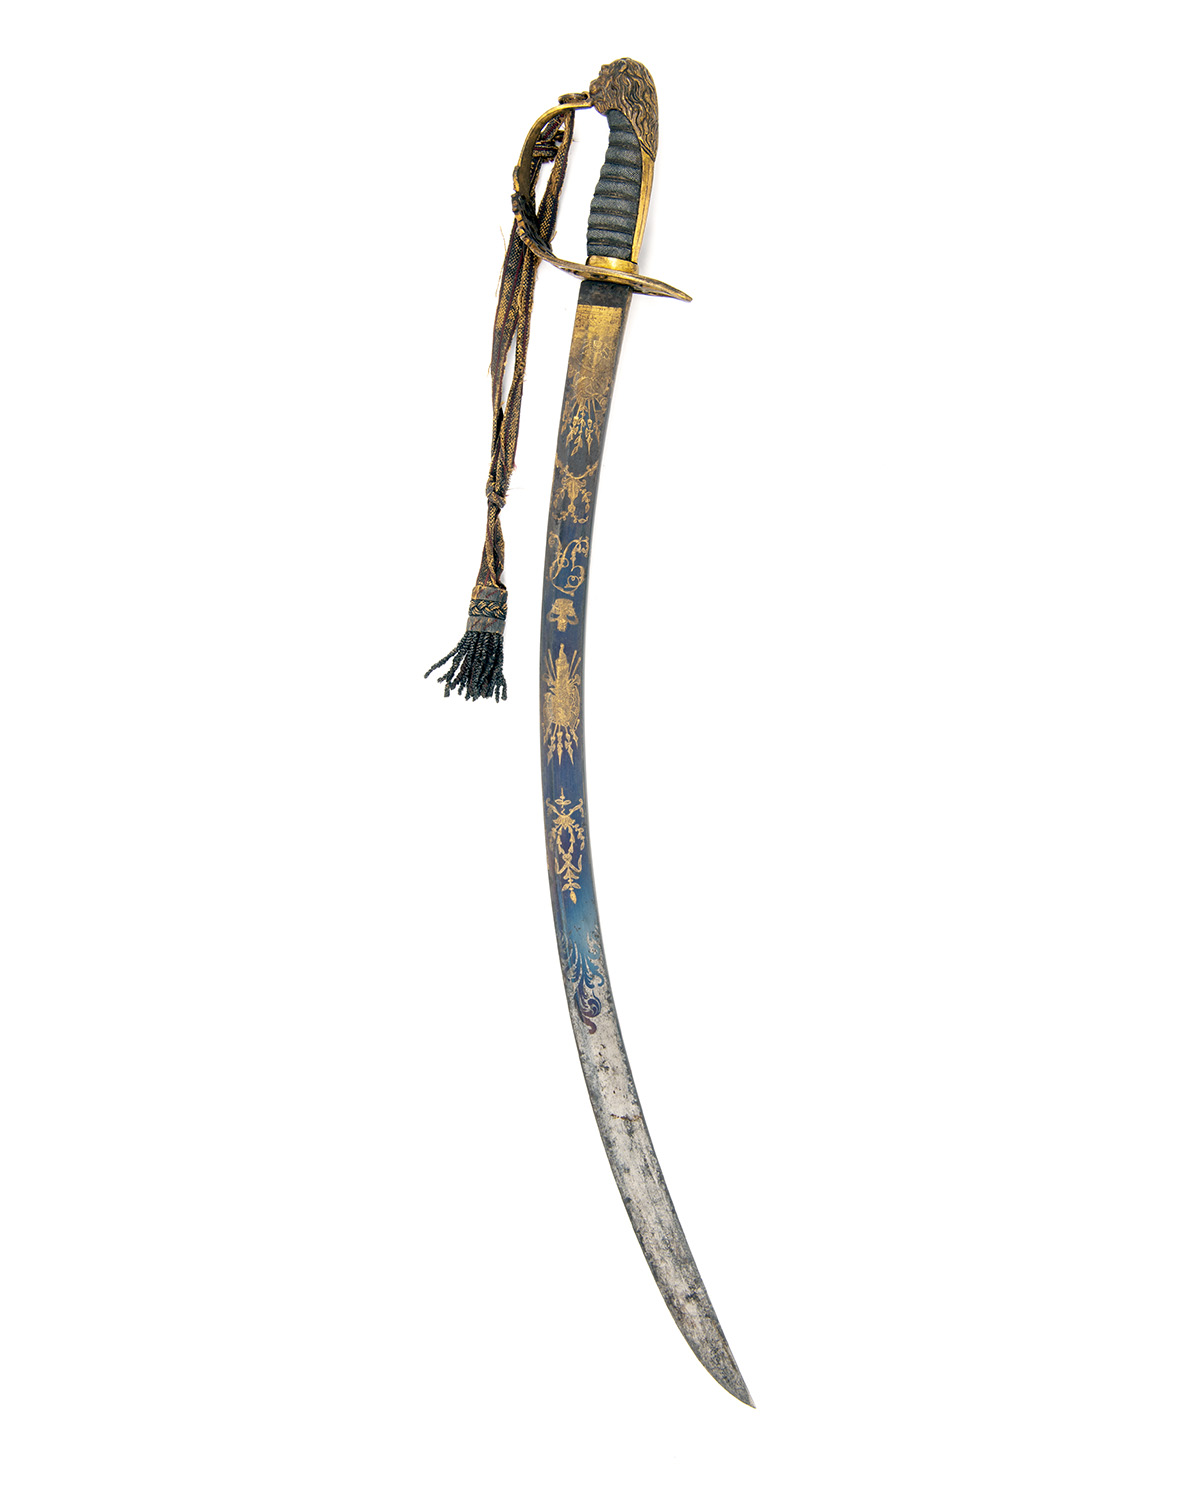 A BRITISH 1803 PATTERN INFANTRY or FLANK OFFICER'S SWORD WITH BLUE AND GILT BLADE, UNSIGNED, circa - Image 2 of 7